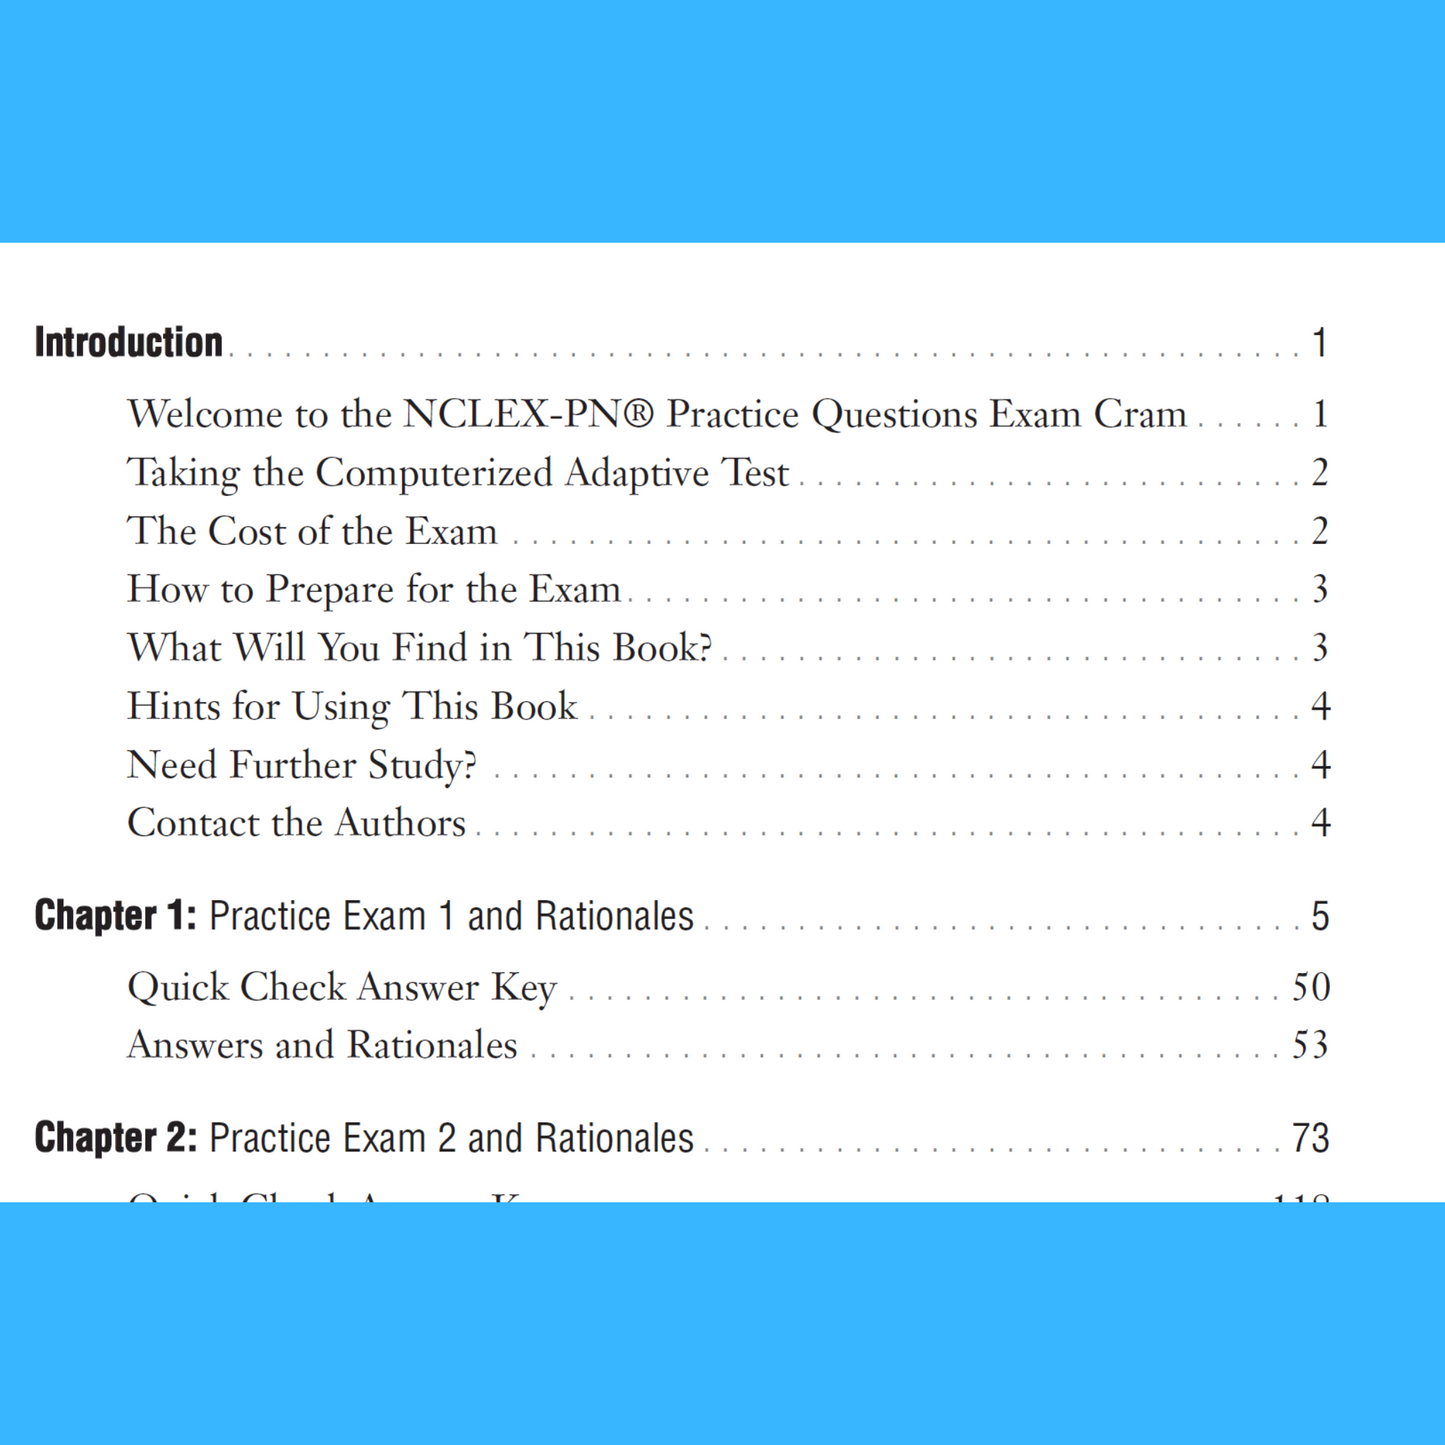 Master the NCLEX PN: Ace Your Exam with These Comprehensive Practice 200 Questions! ebook